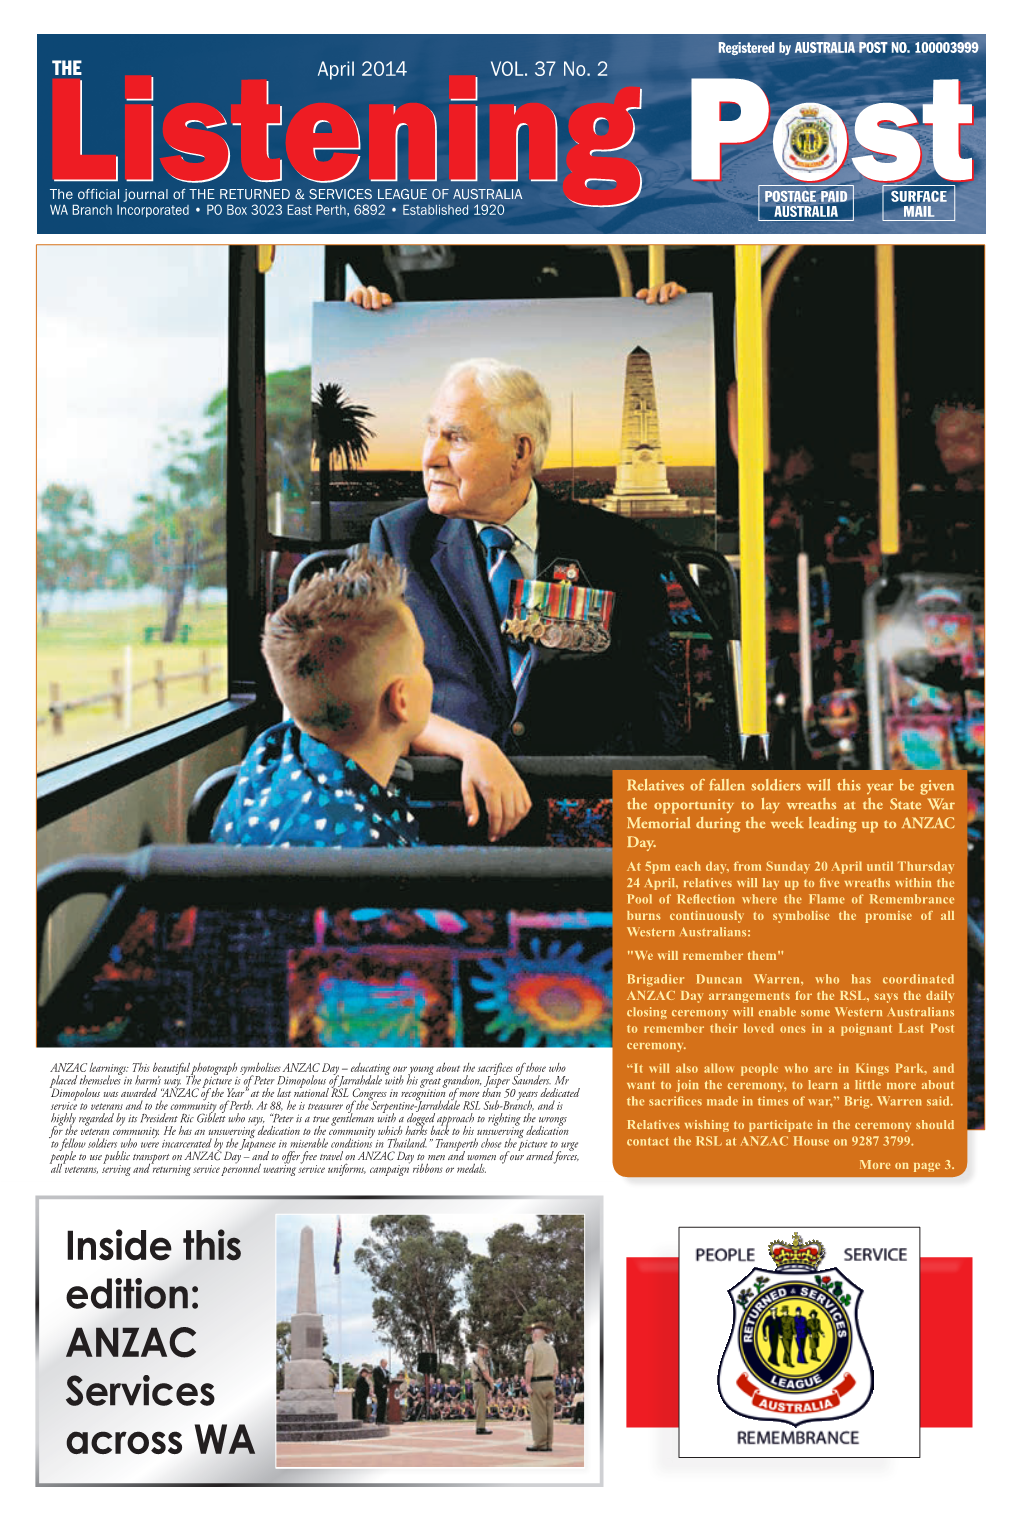 Inside This Edition: ANZAC Services Across WA 2 the LISTENING POST April 2014 the April 2014 VOL